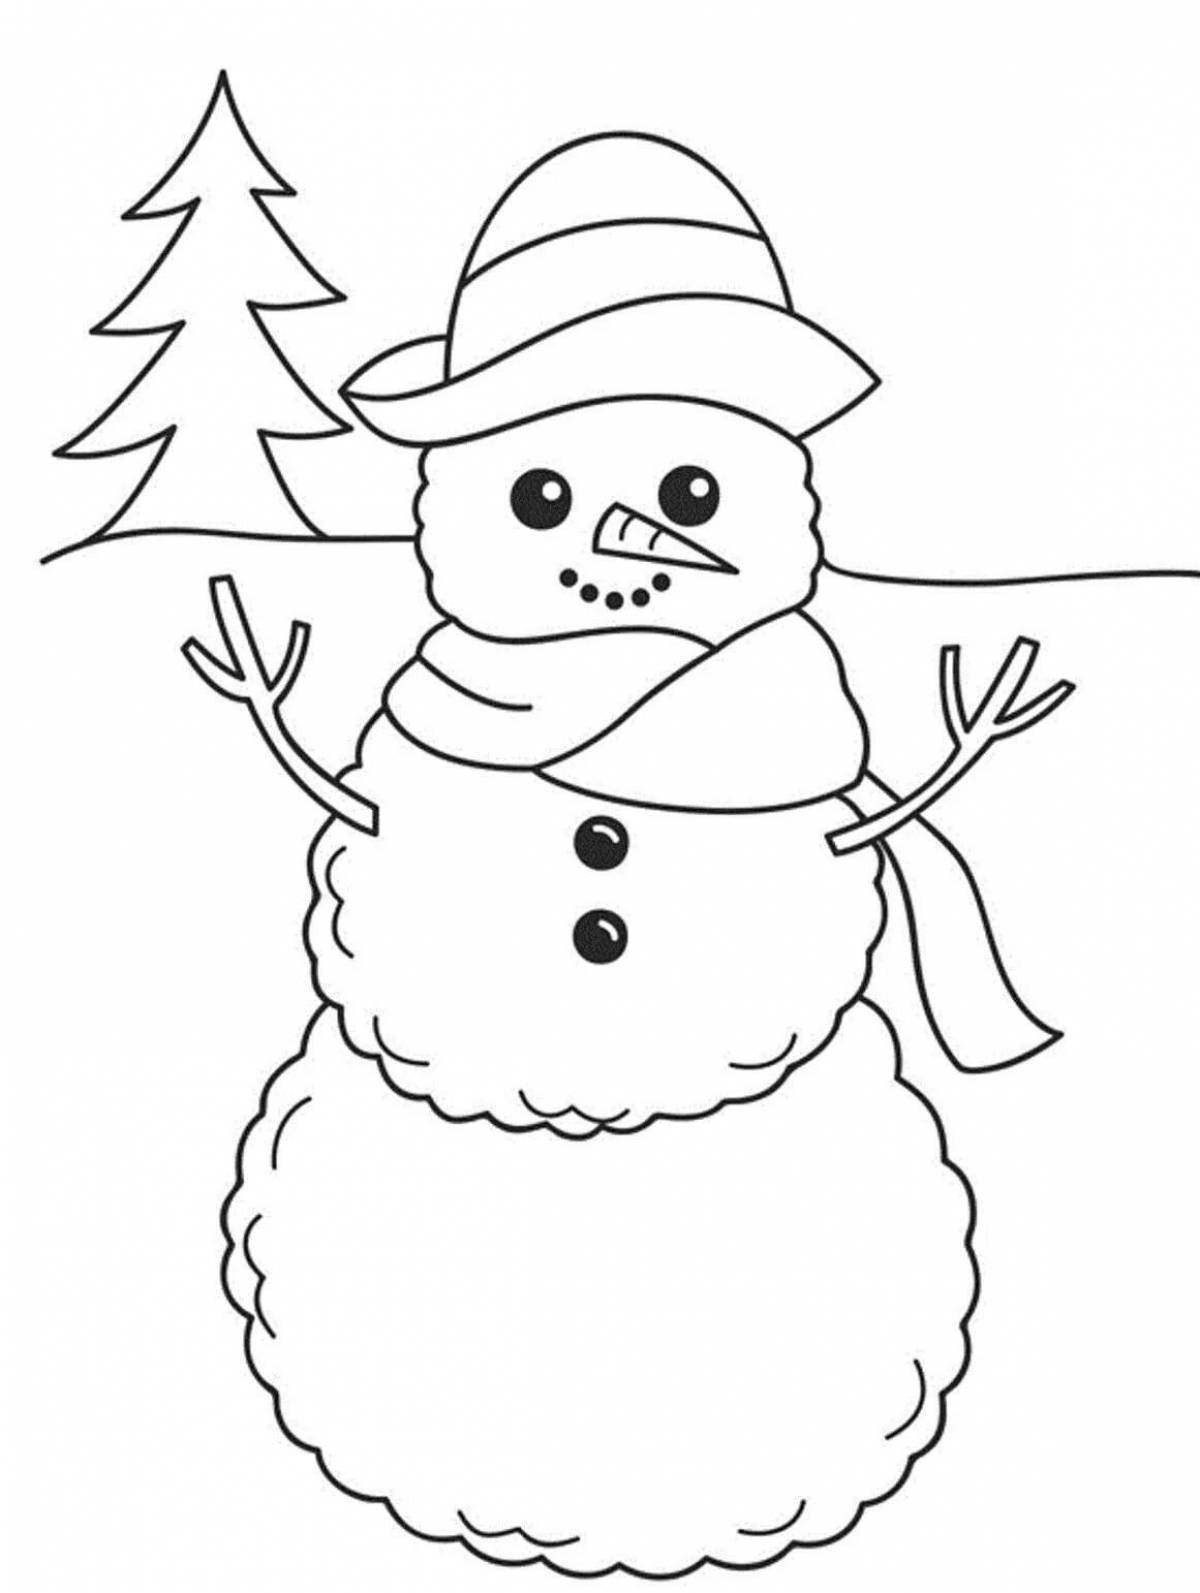 Magic snowman coloring book for kids 6-7 years old